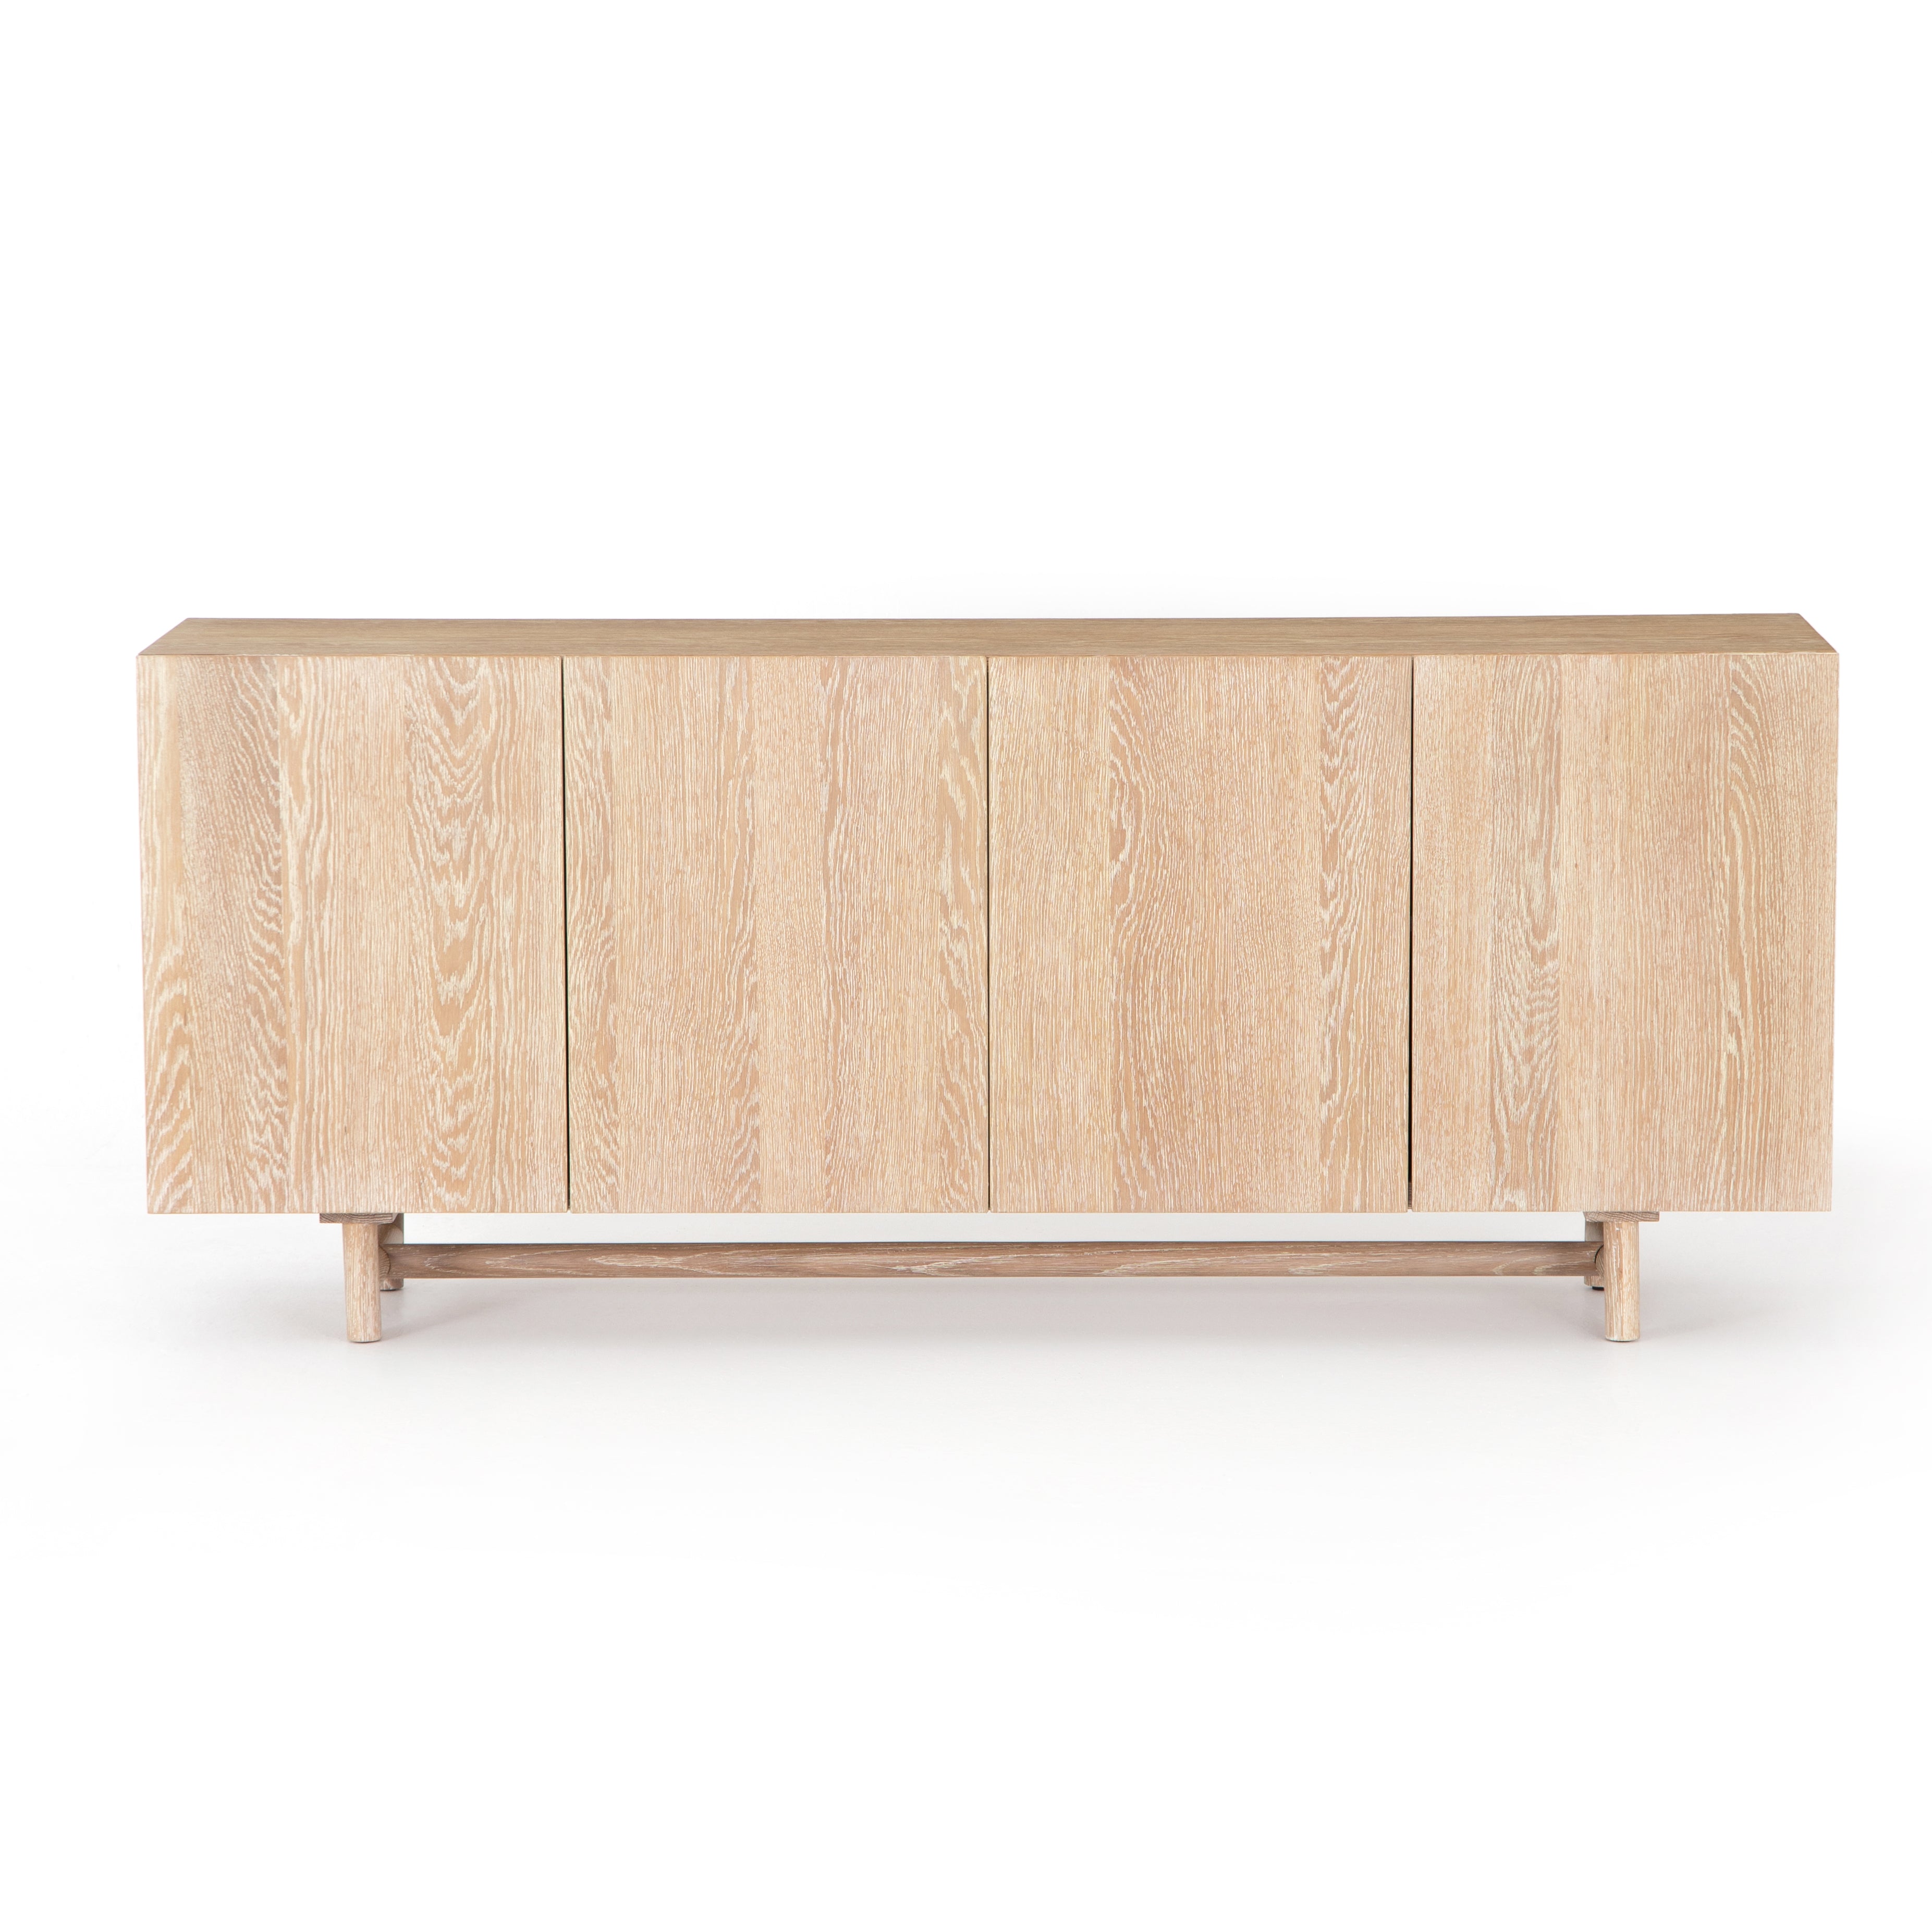 We love the grained matte finish on this Mika Washed Oak Veneer Dining Sideboard. The shelves make this the perfect sideboard for a functional, modernly attractive piece to add to your dining room  Size:  72.00"w x 16.00"d x 30.00"h Materials: Oak Veneer